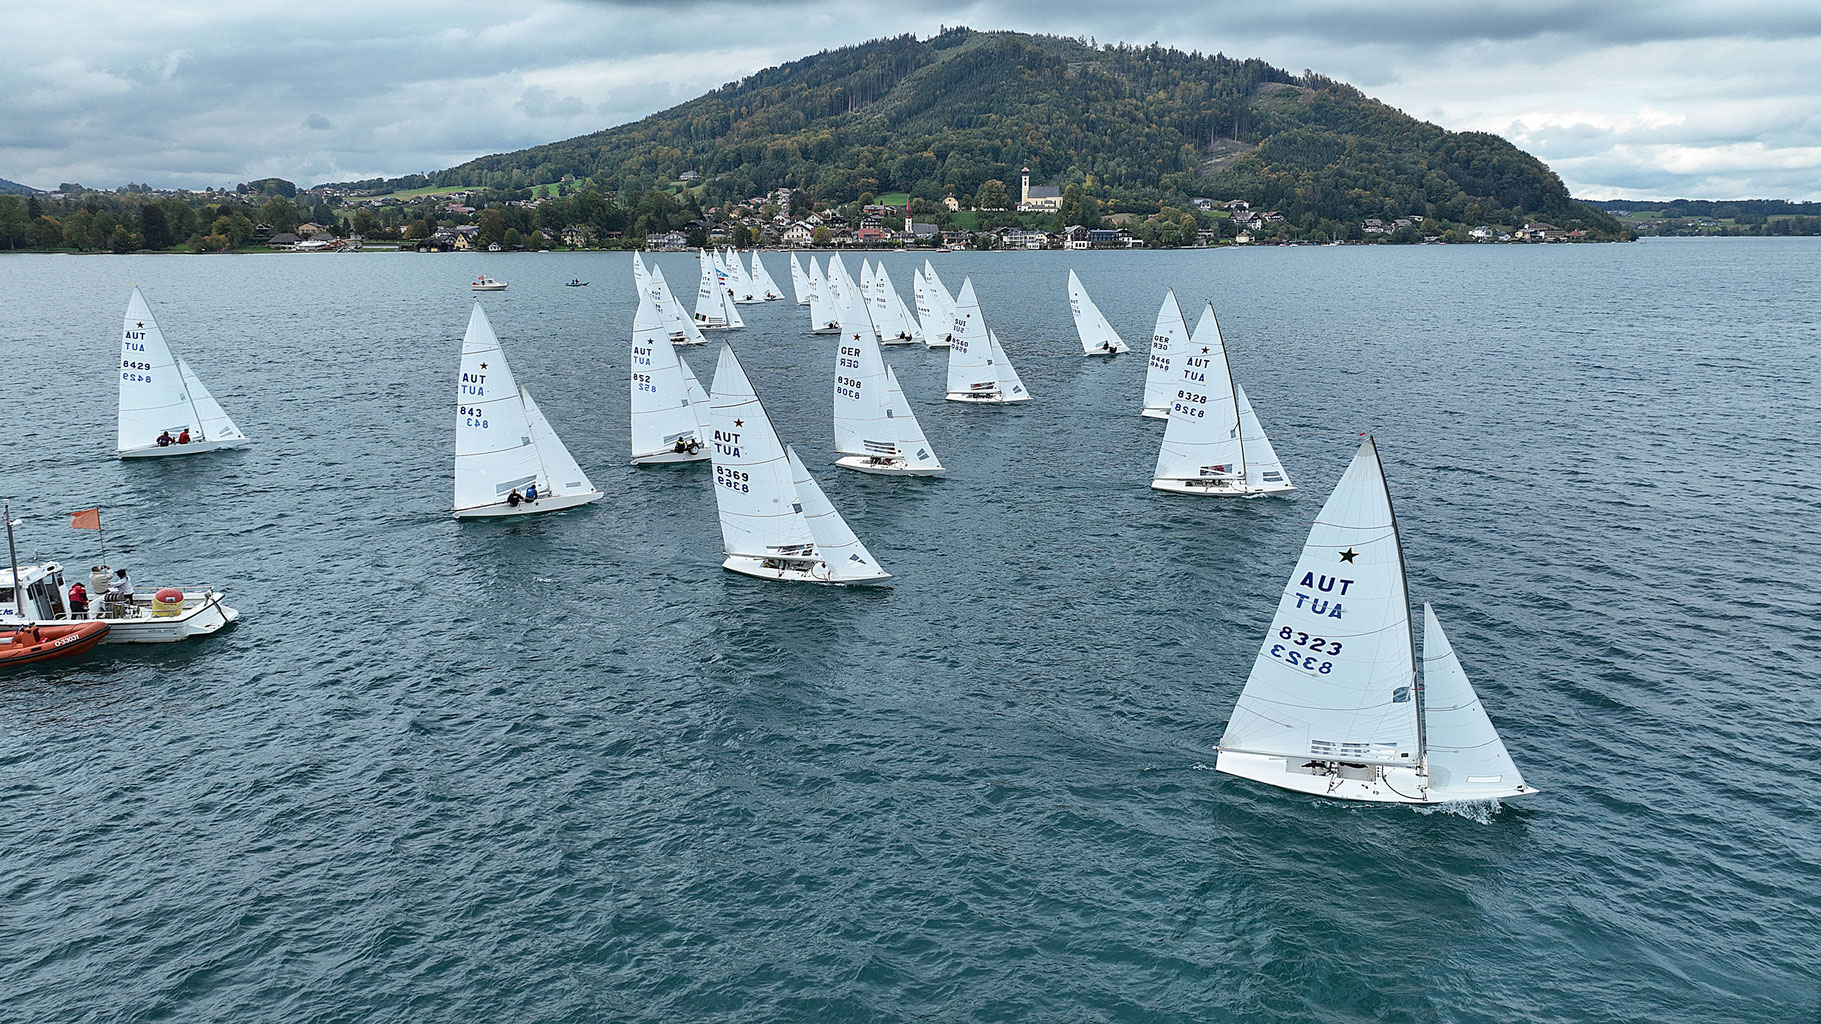  Star  European Championship  Attersee AUT  Day 1